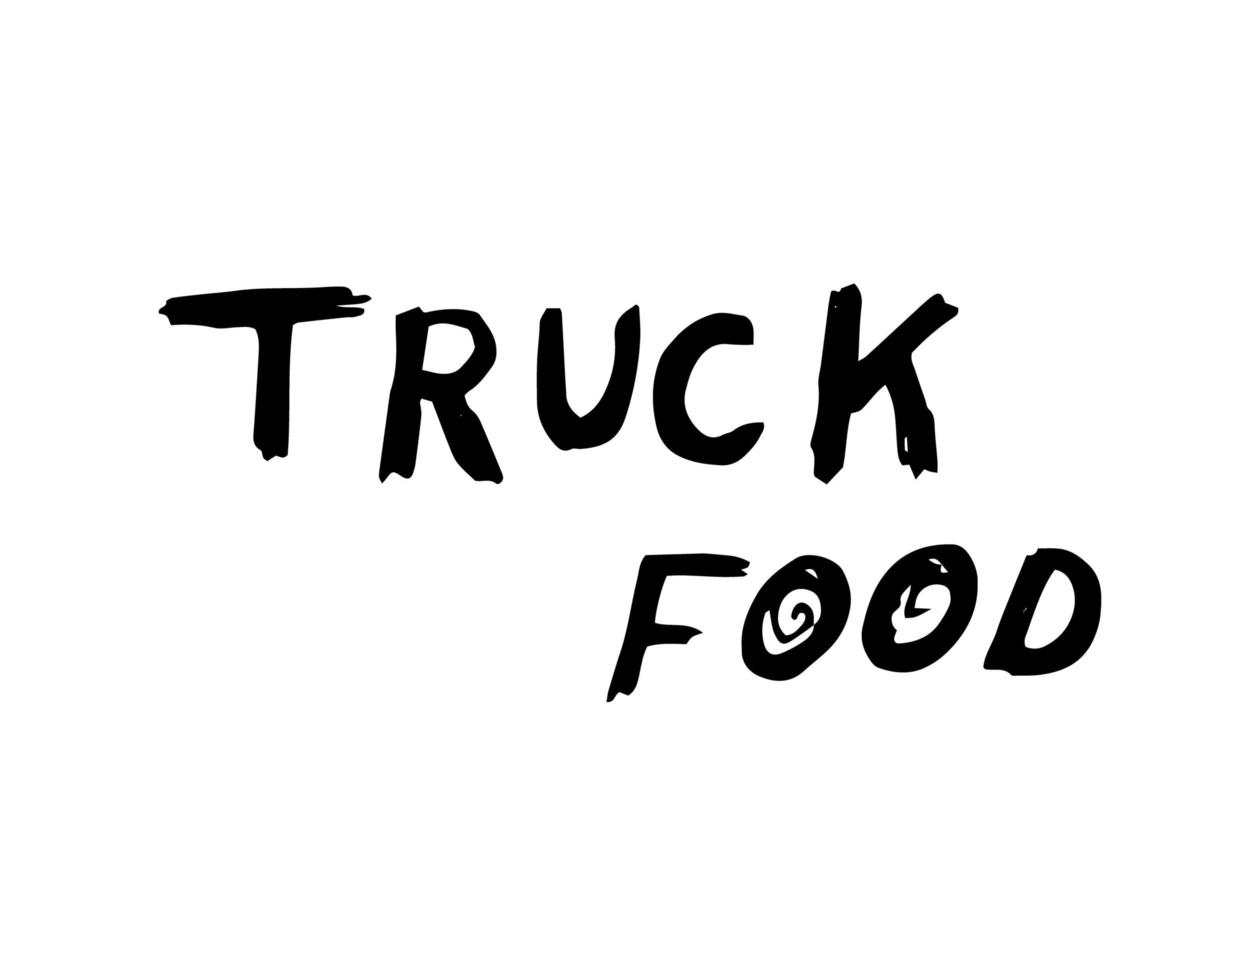 Hand drawn lettering truck food on a white background vector